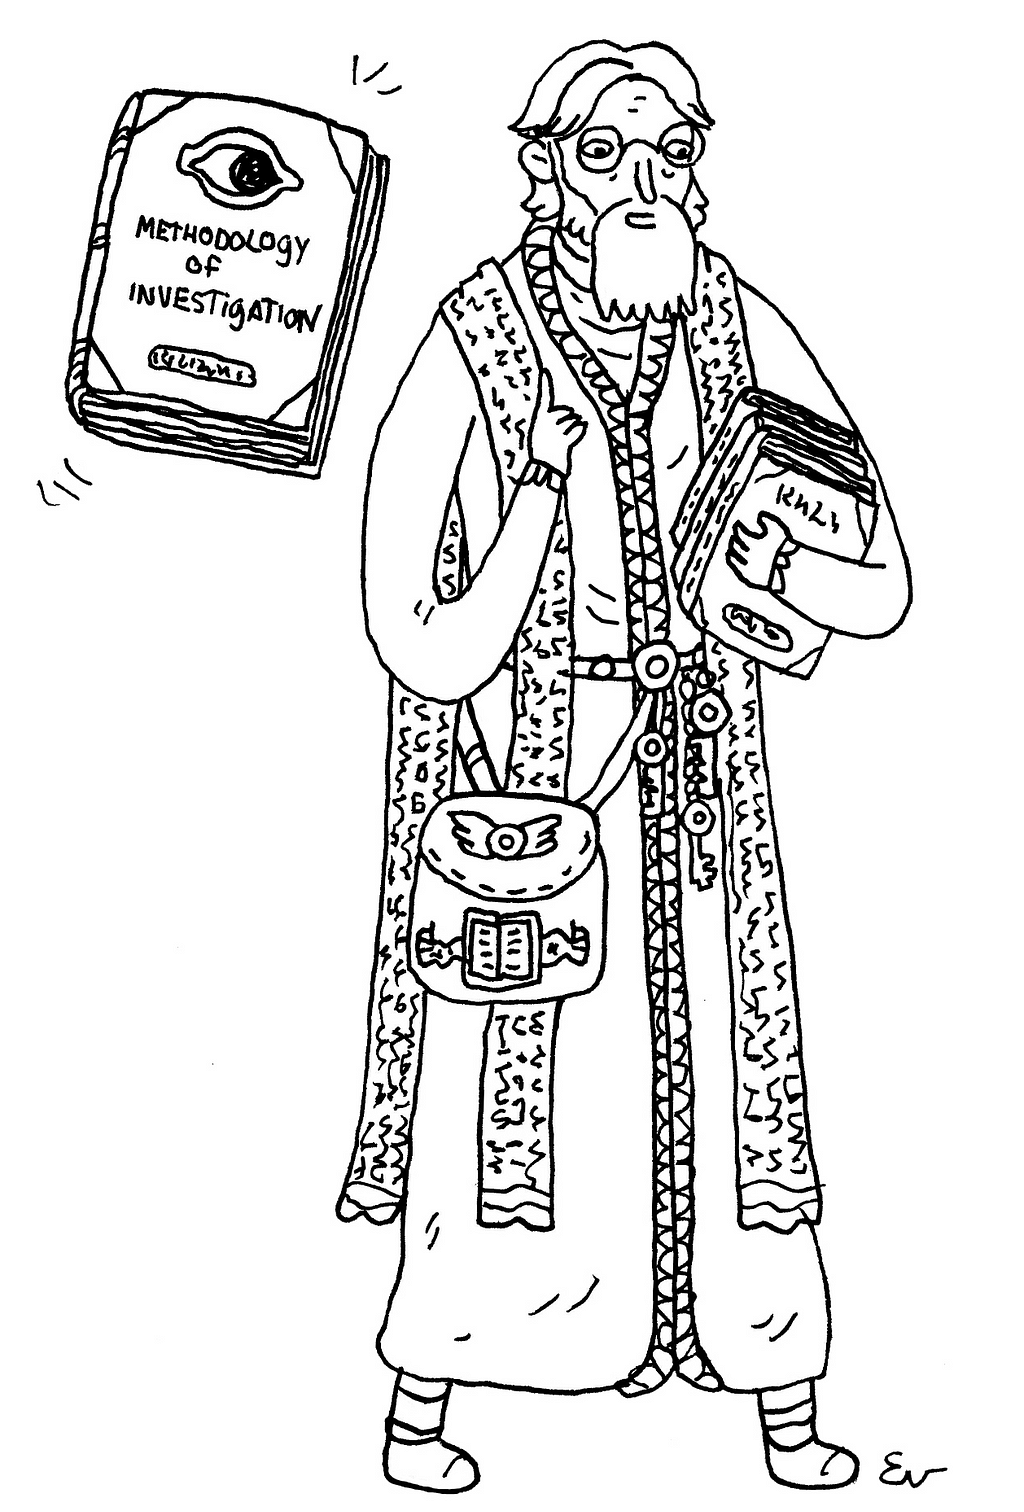 A man in robes carrying several books. One is called Methodology of Investigation.